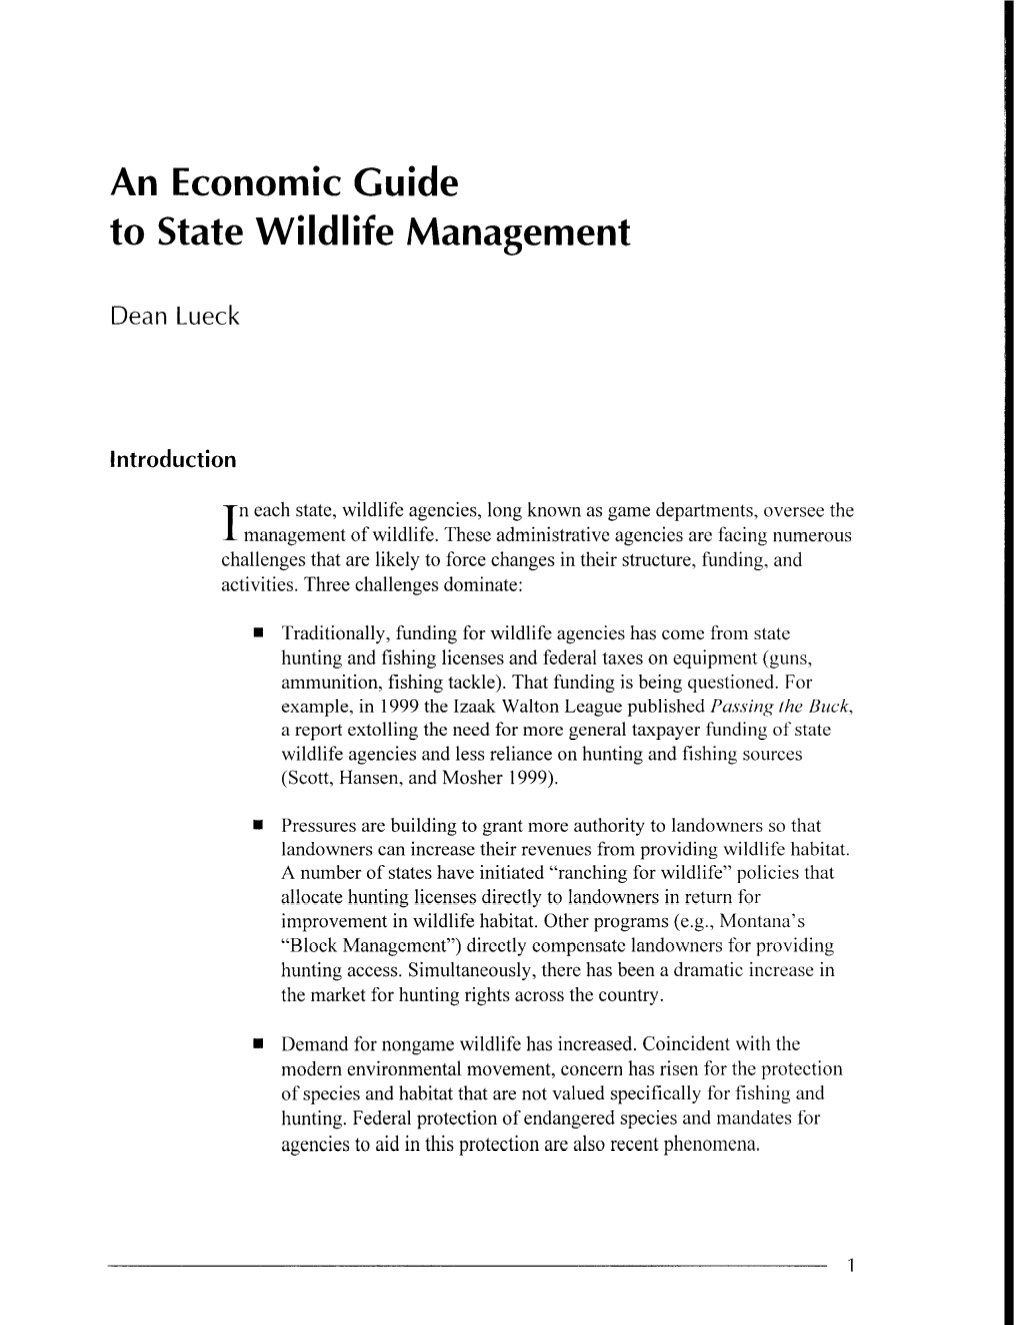 An Economic Guide to State Wildlife Management